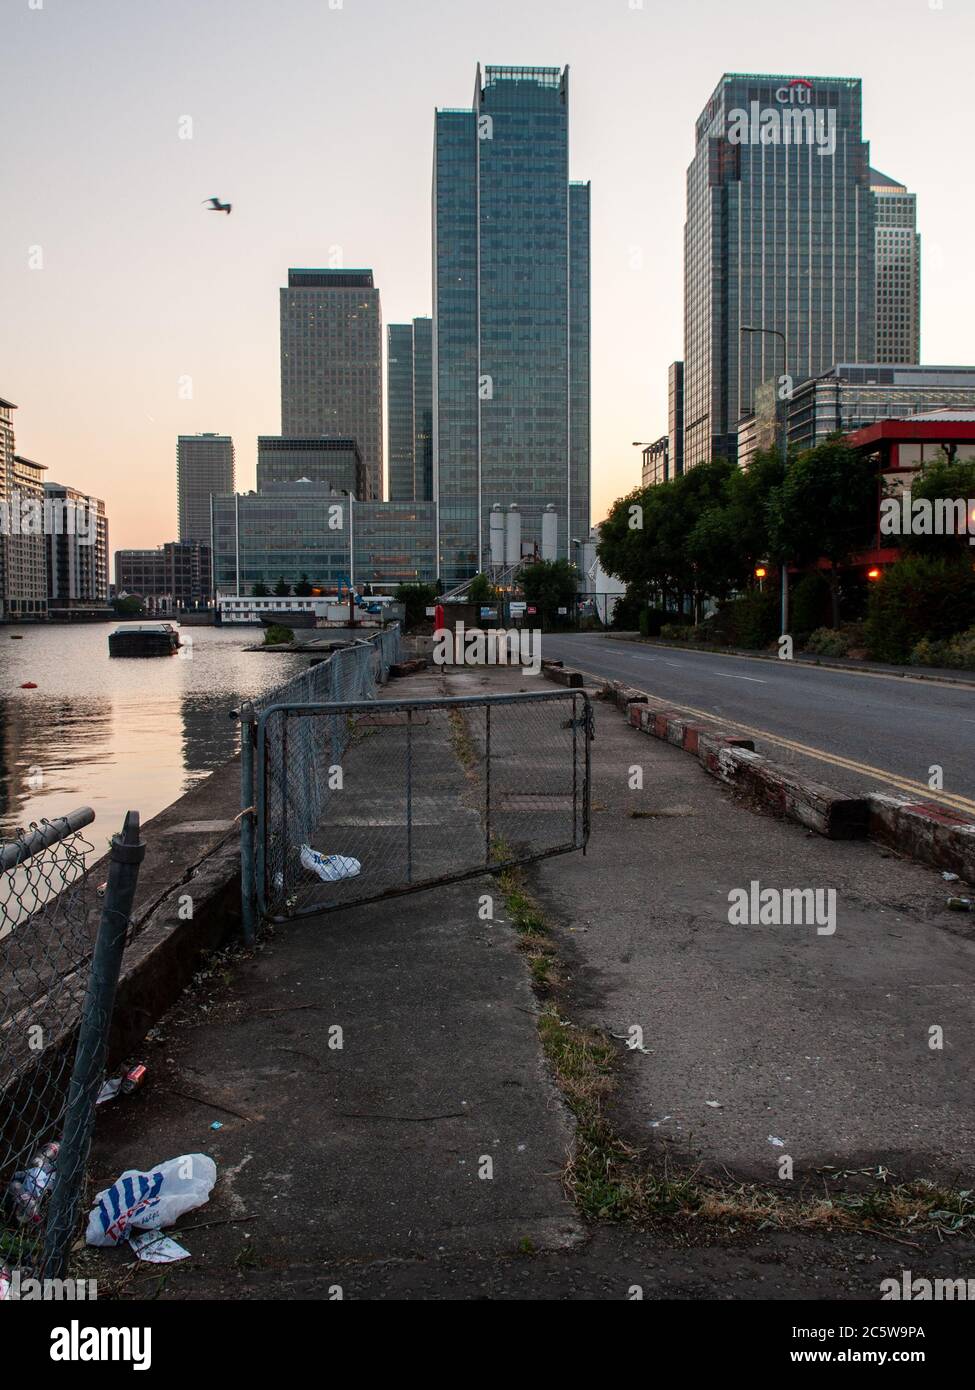 London, England, UK - June 26, 2010: The Modern glass and steel office skyscrapers and apartment buildings of Canary Wharf rise behind the derelict qu Stock Photo